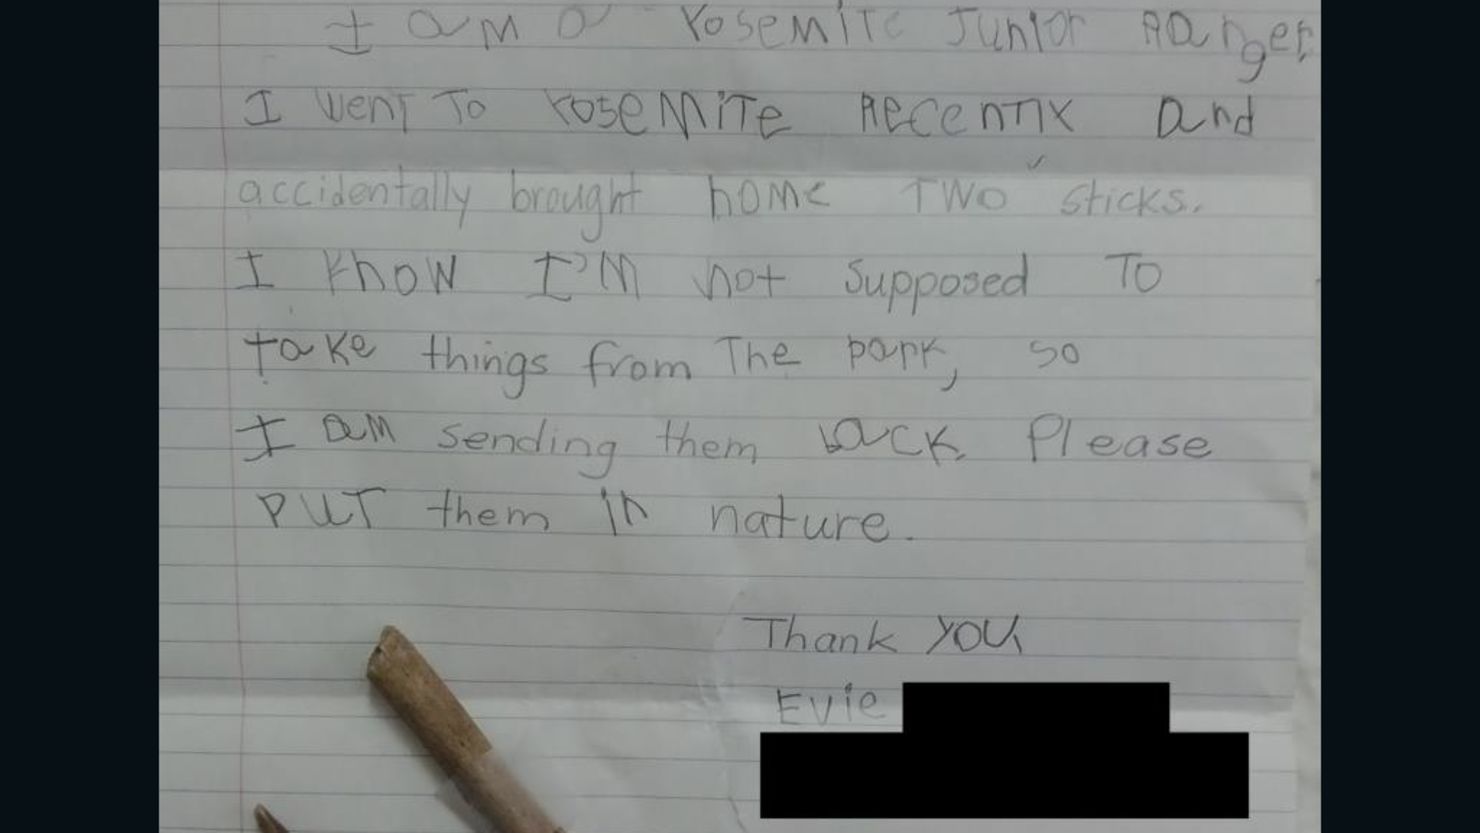 Yosemite Junior Ranger "Evie" returned two sticks she took from the park with a note asking they be returned to  nature. 